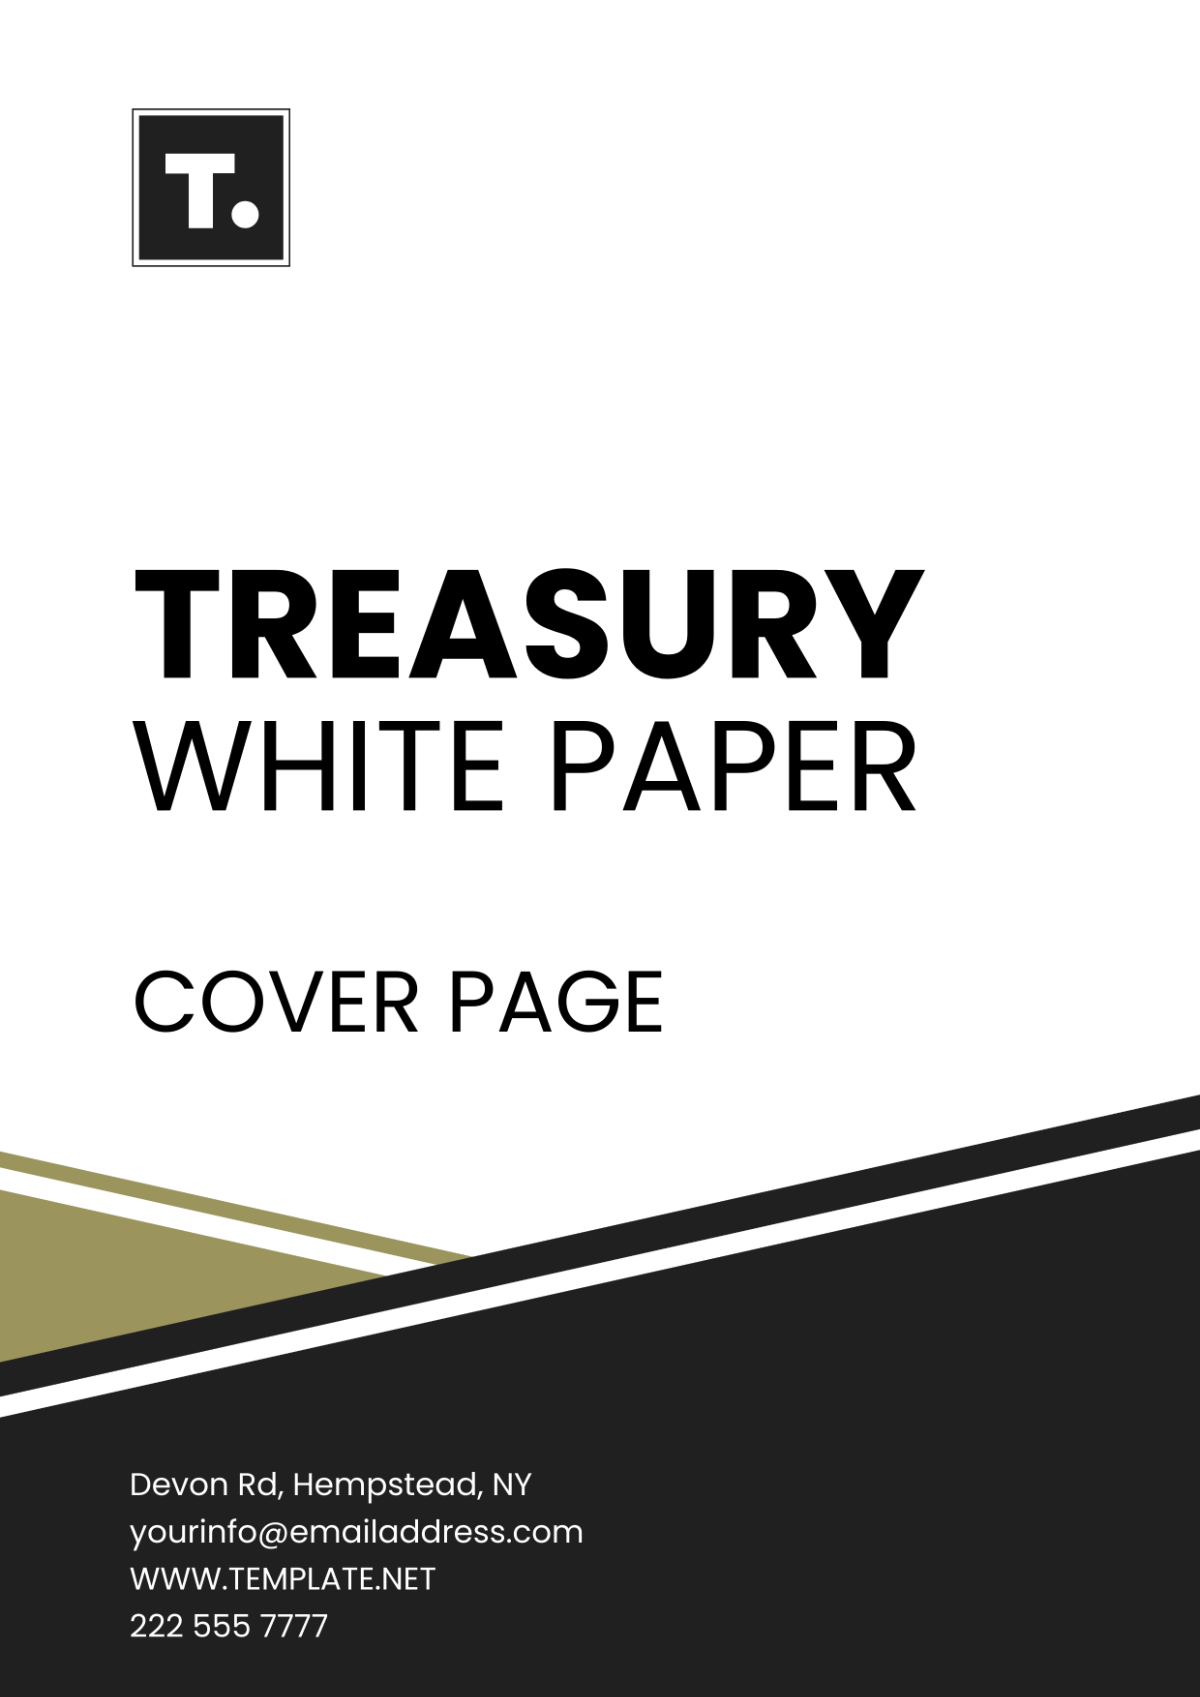 Treasury White Paper Cover Page